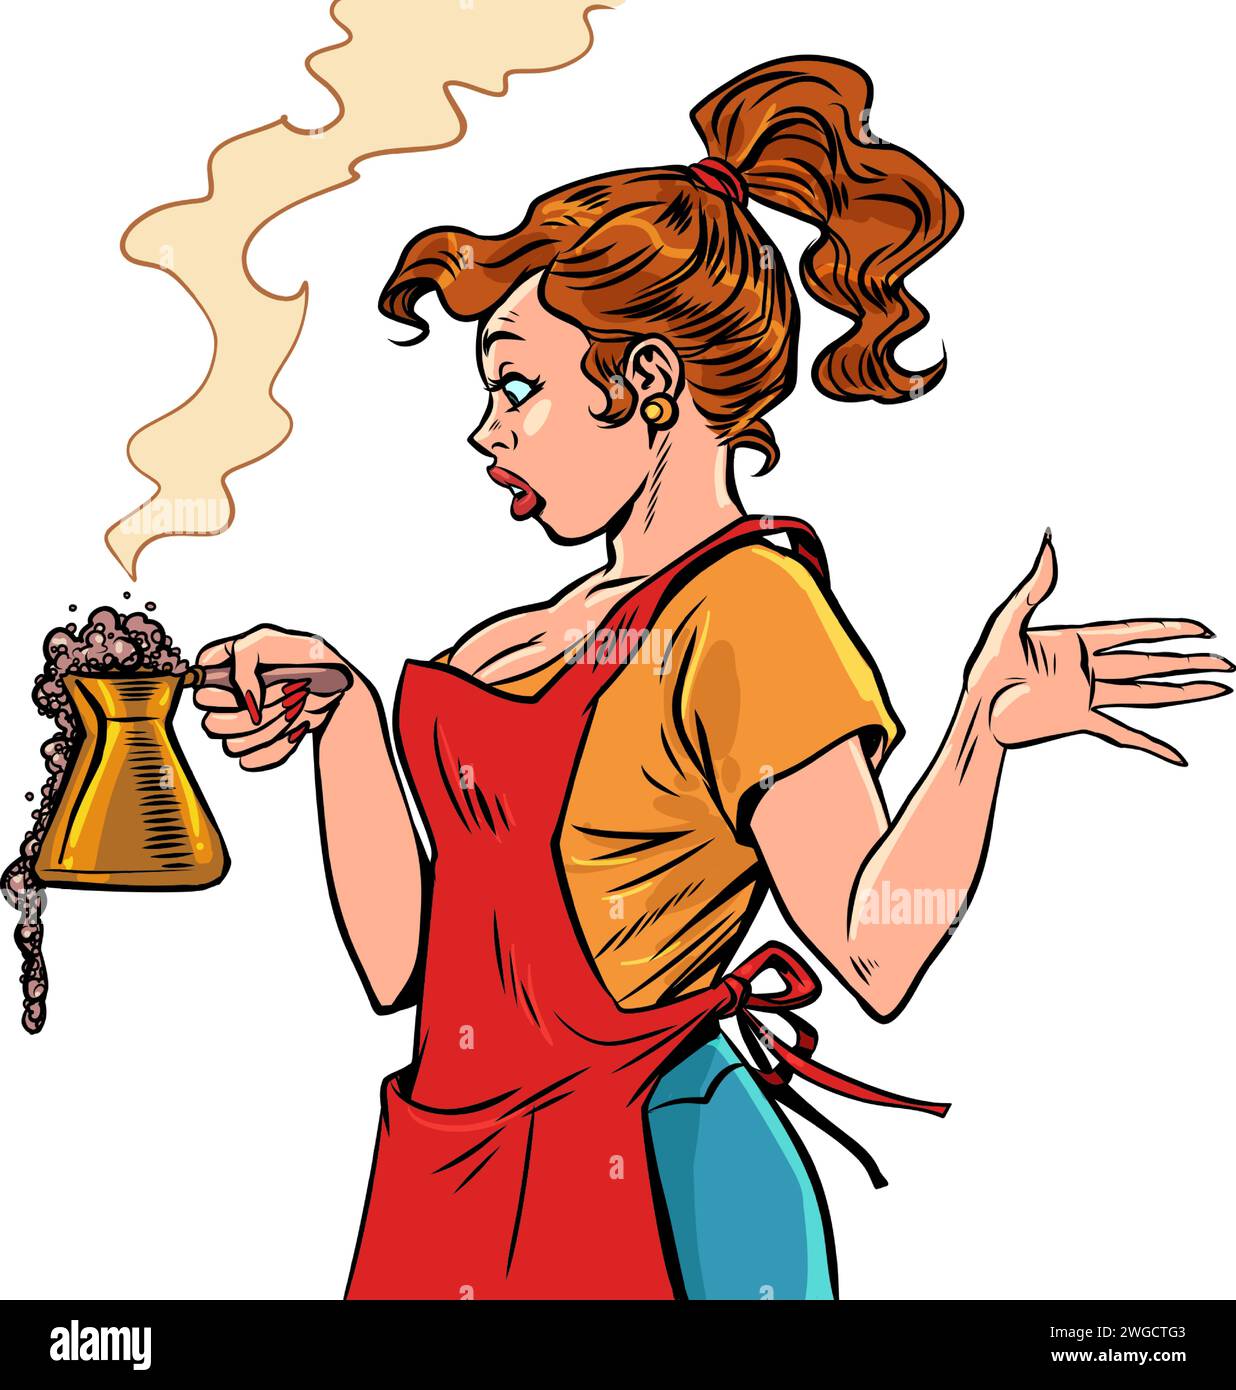 The fast food barista is confused by what is happening. A girl in an apron prepares coffee. The coffee ran out while brewing. Comic cartoon pop art re Stock Vector